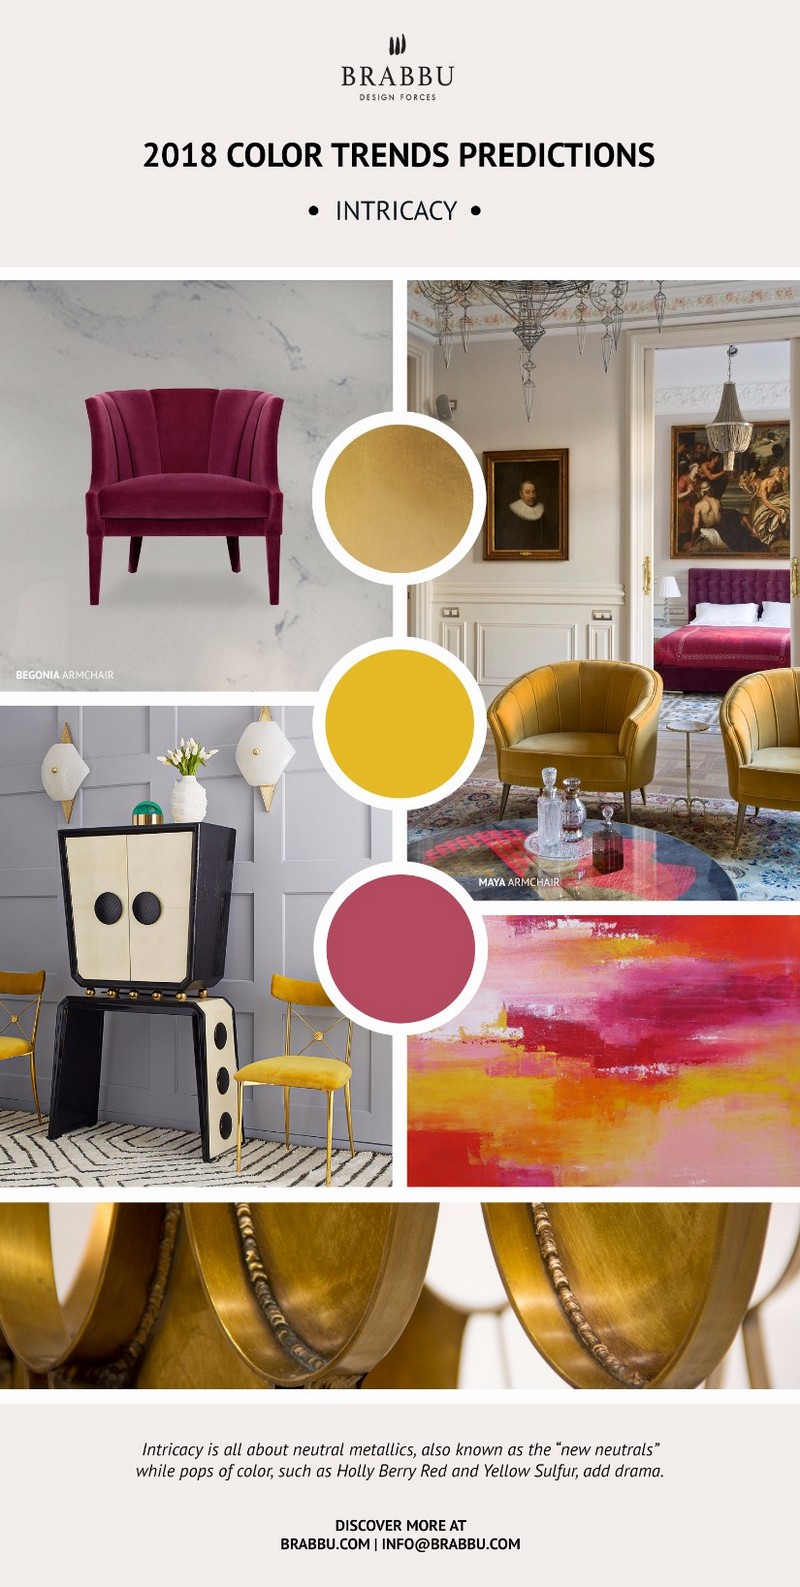 Watch Out: 2018 Pantone Color Trends Predictions Are Here